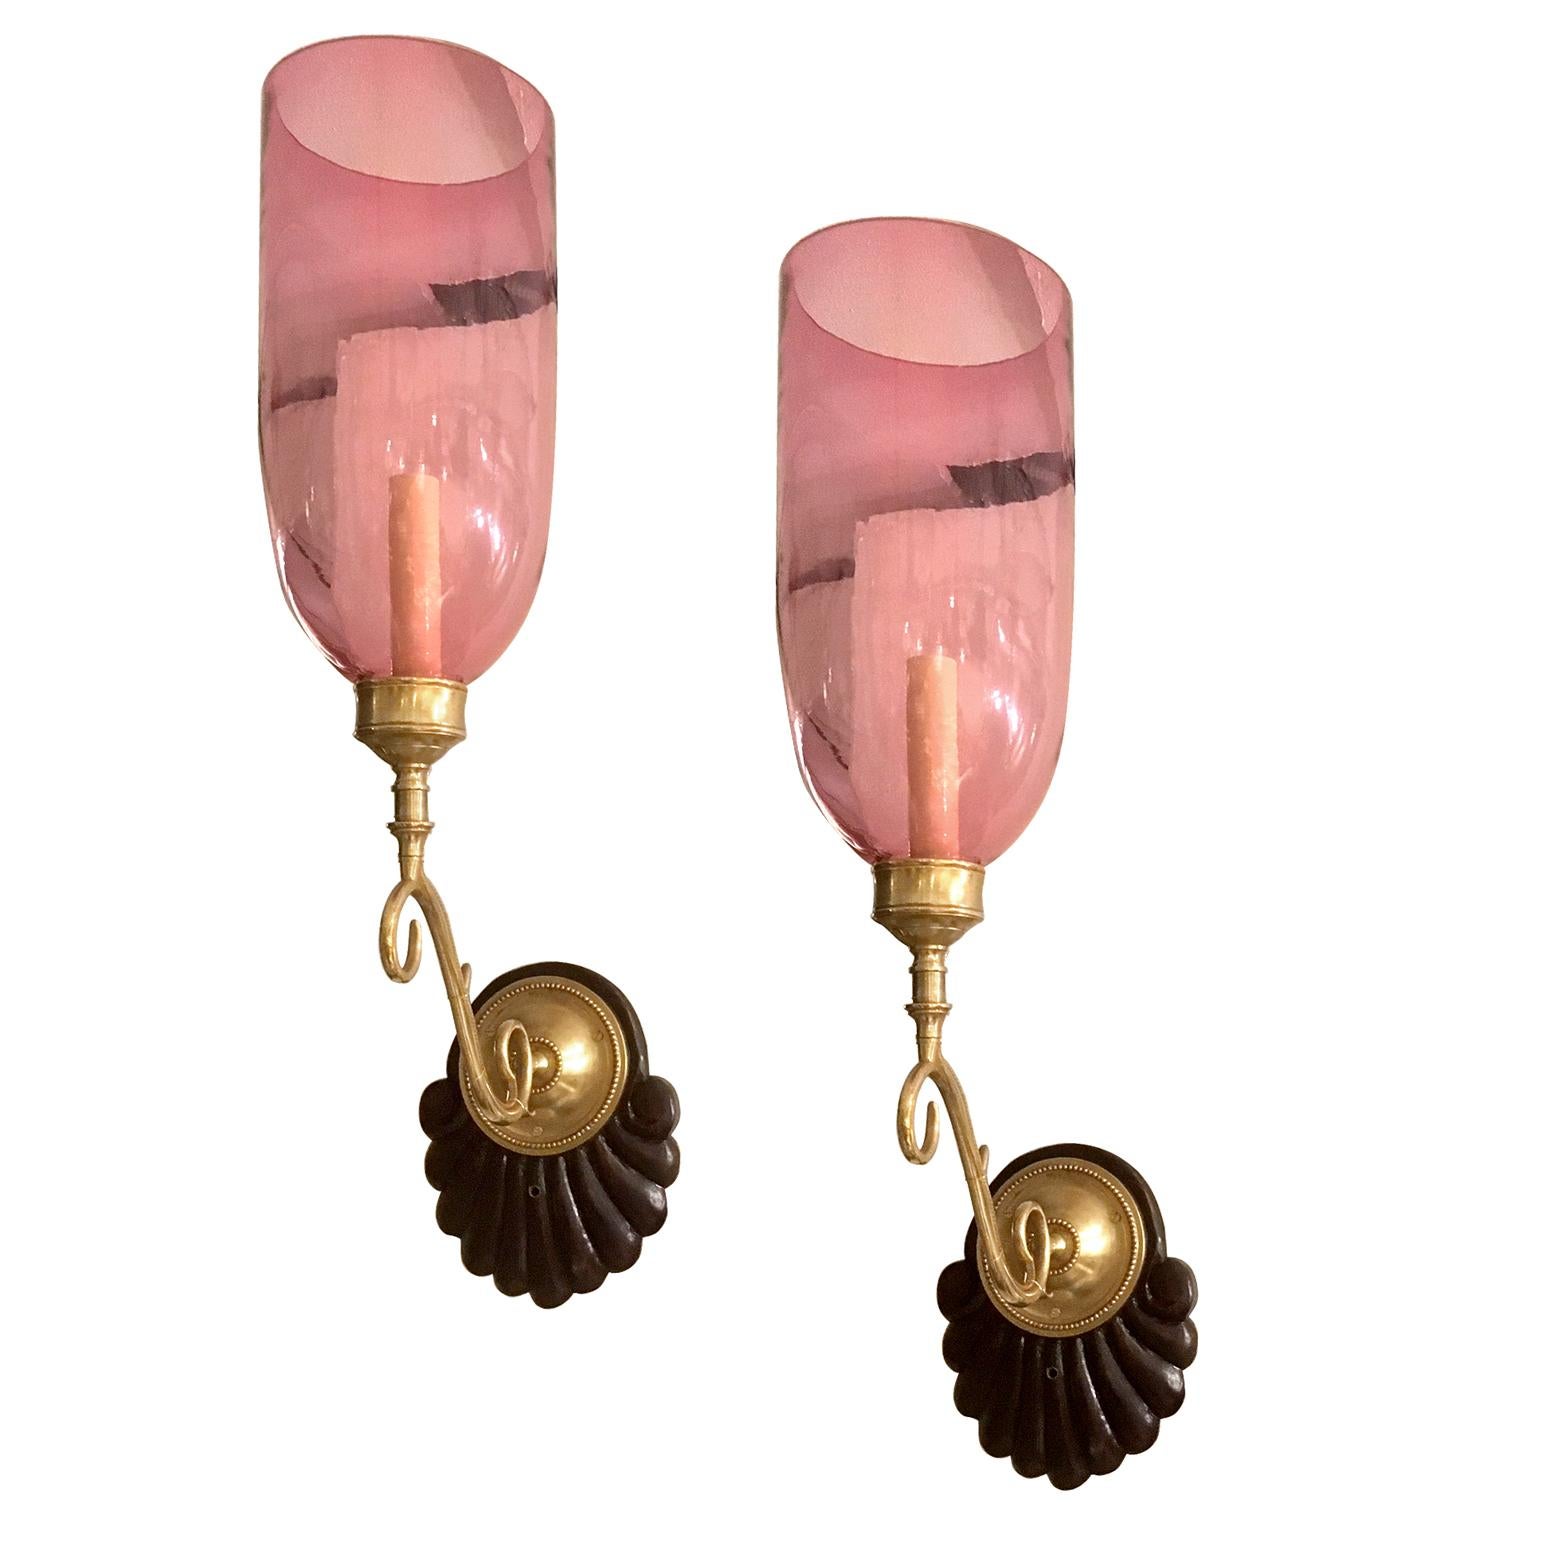 Pair of circa 1900 Anglo Indian single-light sconces with carved wood backplates and ruby red glass hurricanes.

Measurements:
Height 24